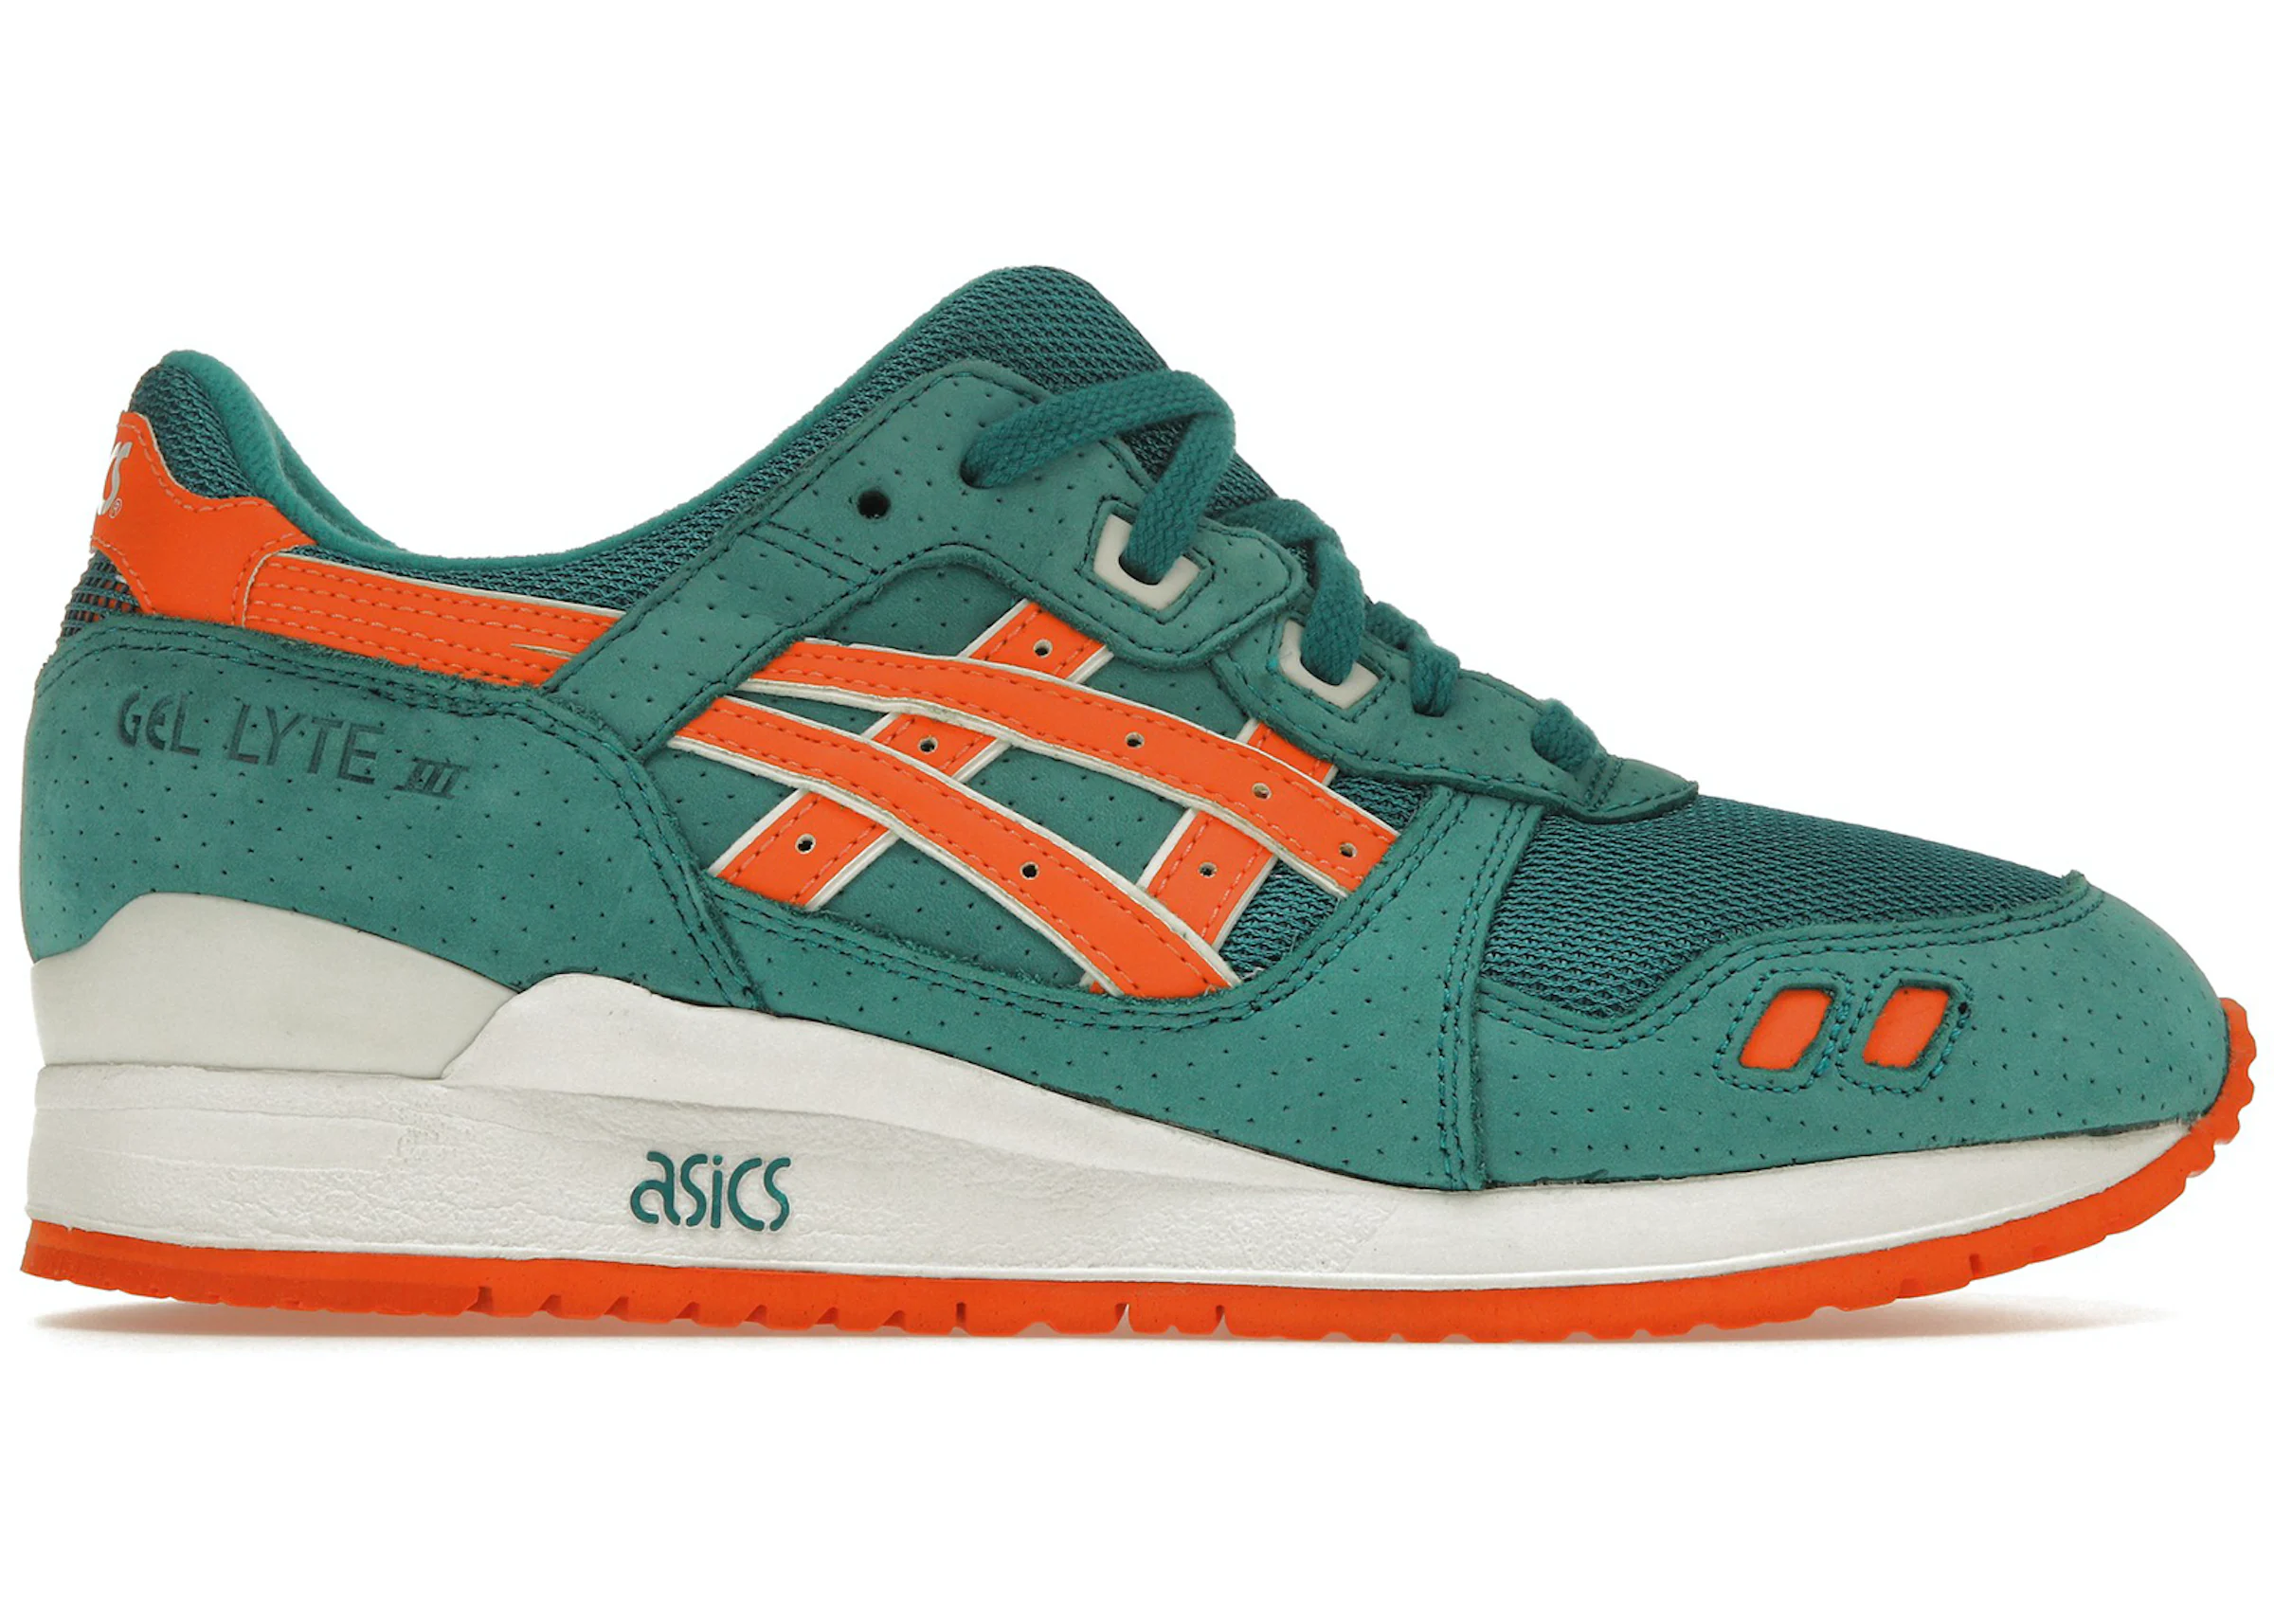 https://images.stockx.com/images/ASICS-Gel-Lyte-III-Ronnie-Fieg-ECP-Miami-2013-Product.jpg?fit=fill&bg=FFFFFF&w=1200&h=857&fm=webp&auto=compress&dpr=2&trim=color&updated_at=1685000205&q=60